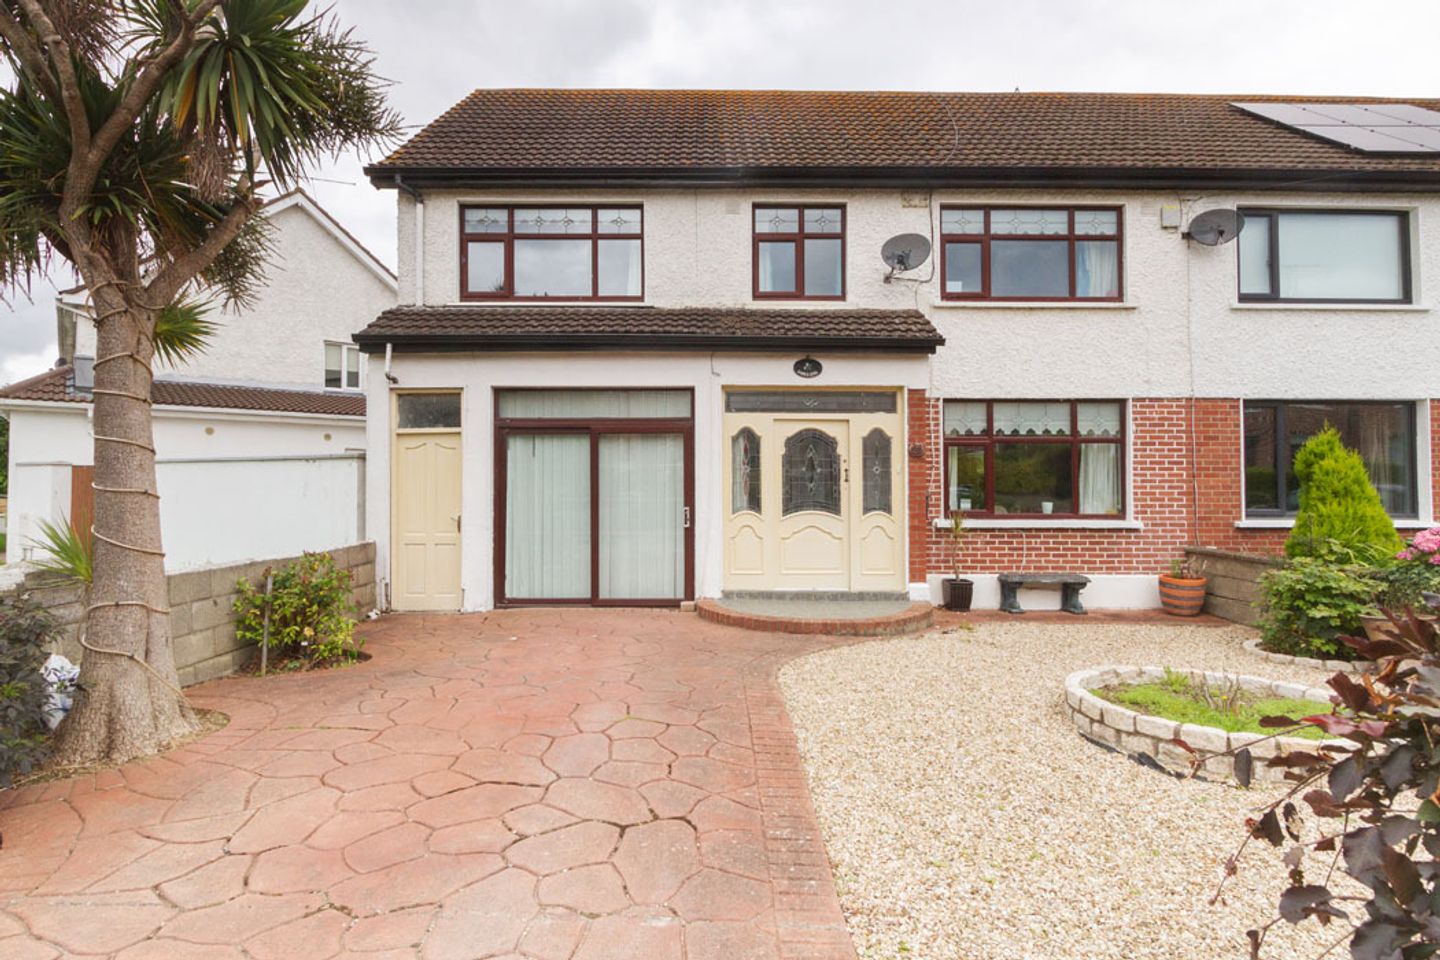 Gable End, 20 Newcourt Road, Bray, Co. Wicklow, A98RP84